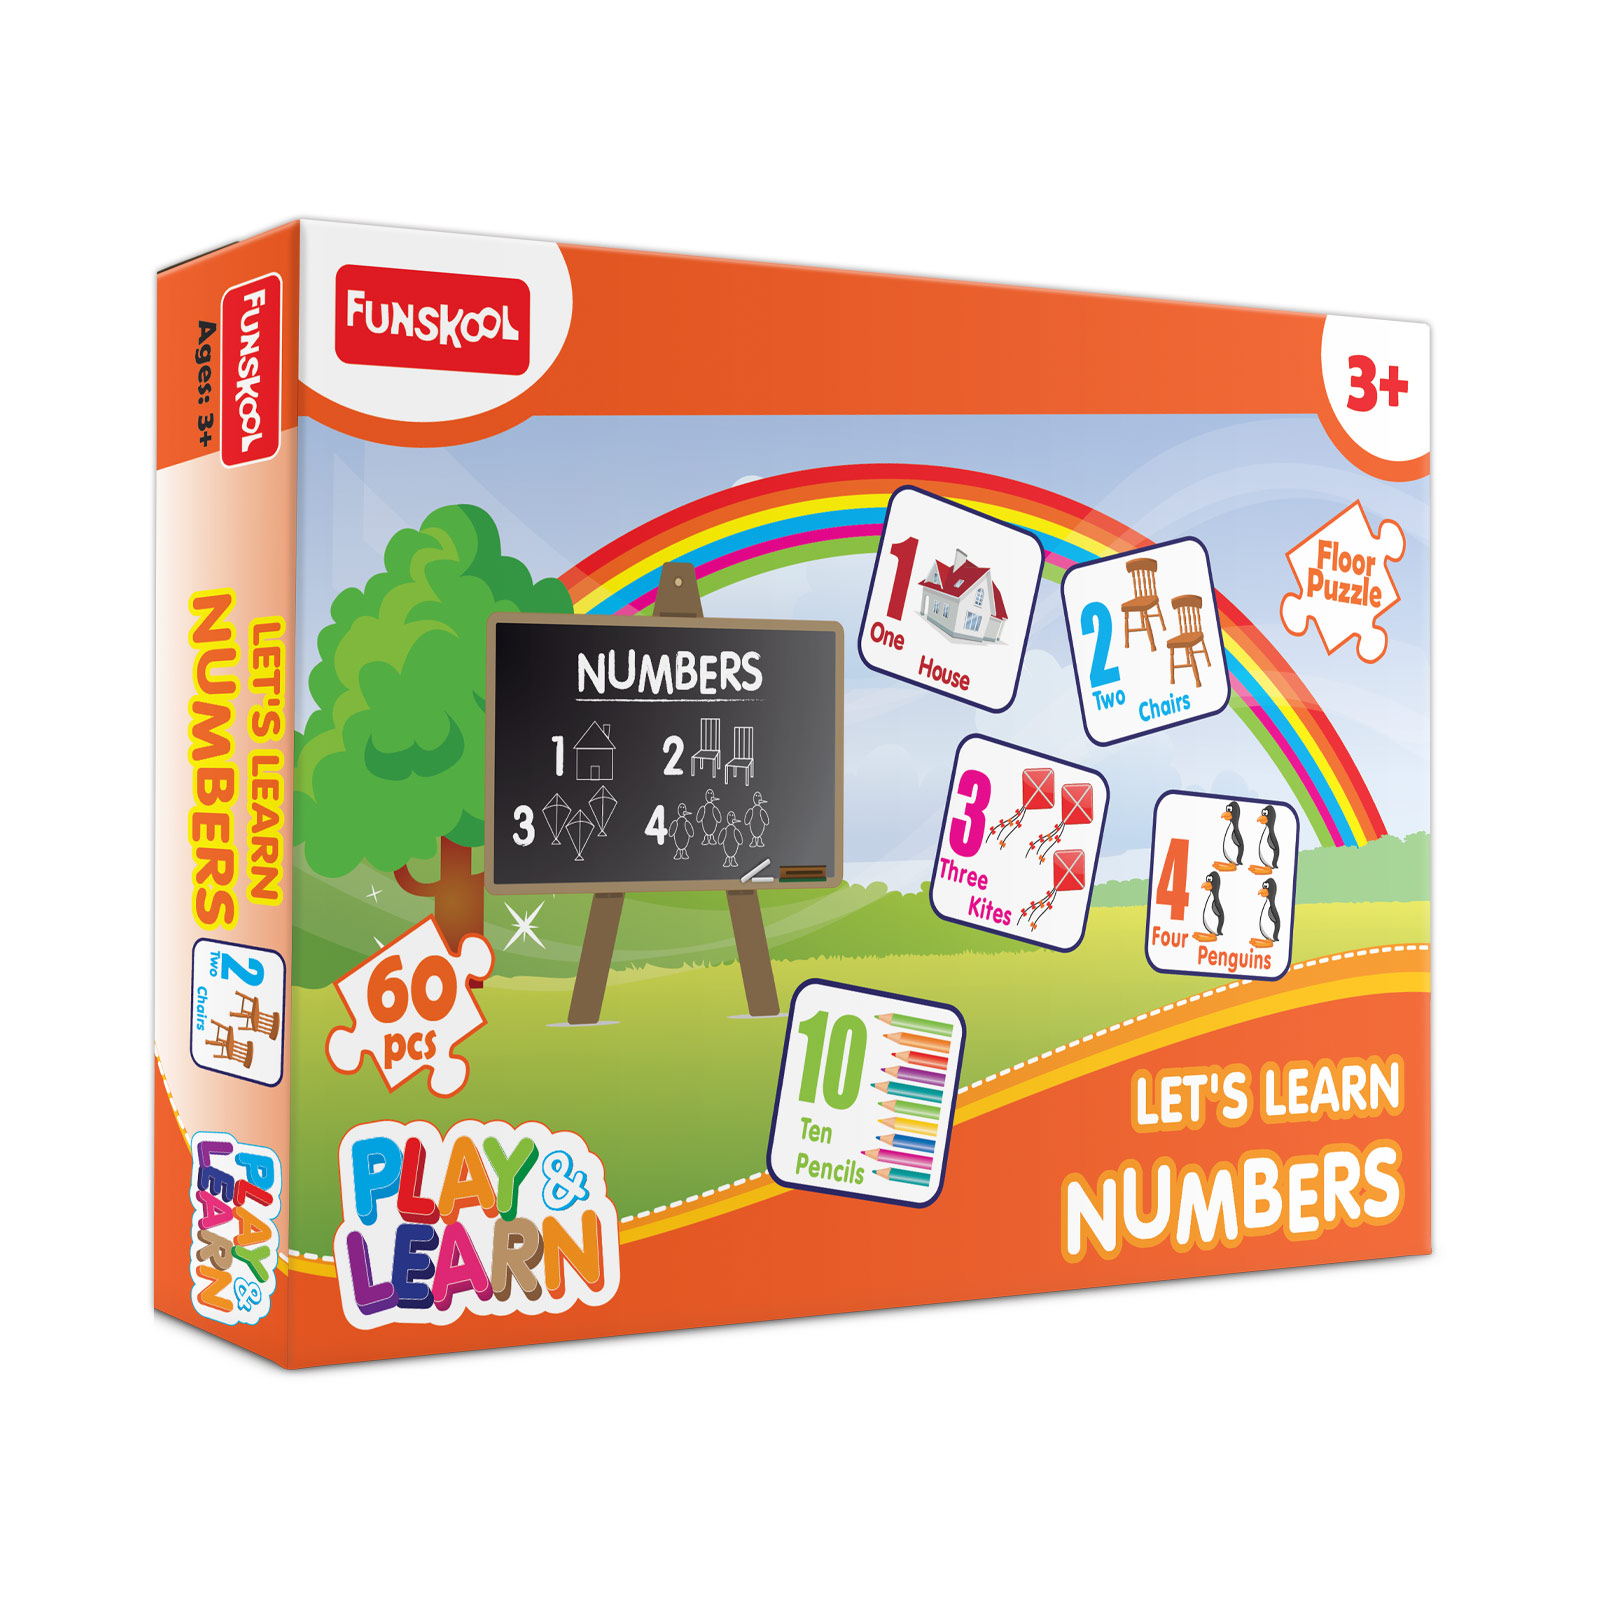 Let's Learn Numbers Puzzle